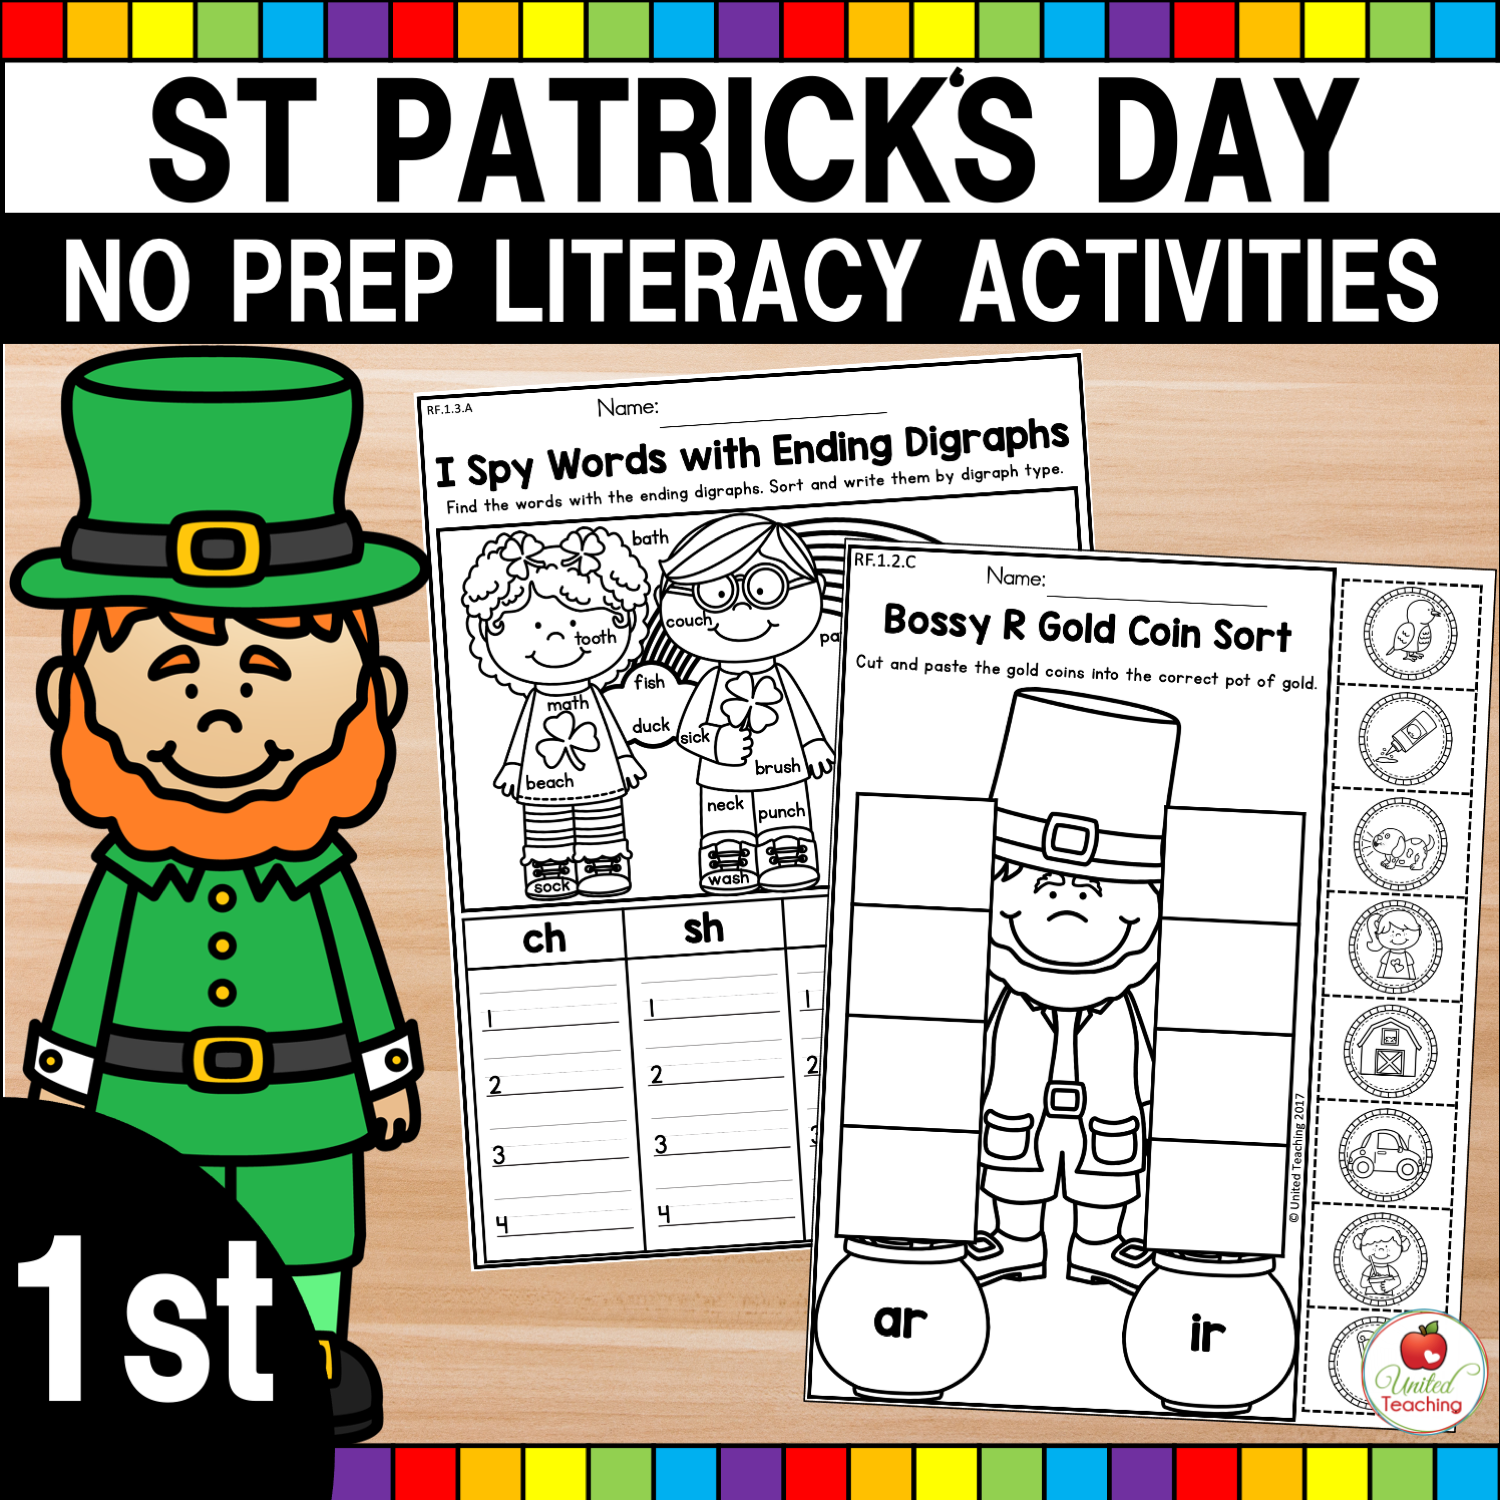 st-patrick-s-day-literacy-activities-for-1st-grade-united-teaching